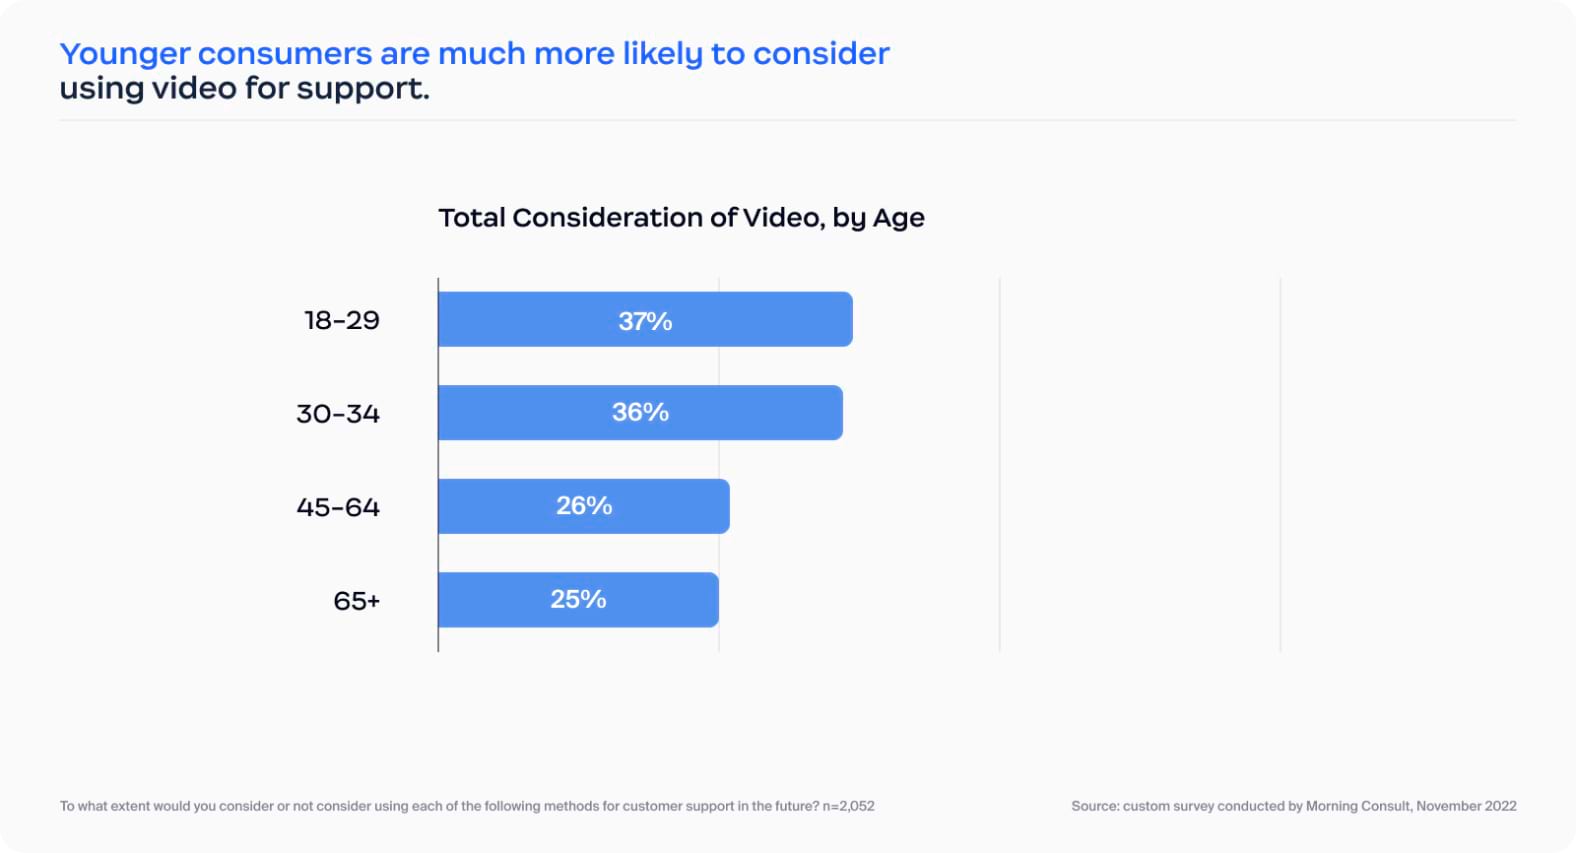 Younger consumers are much more likely to consider using video for support